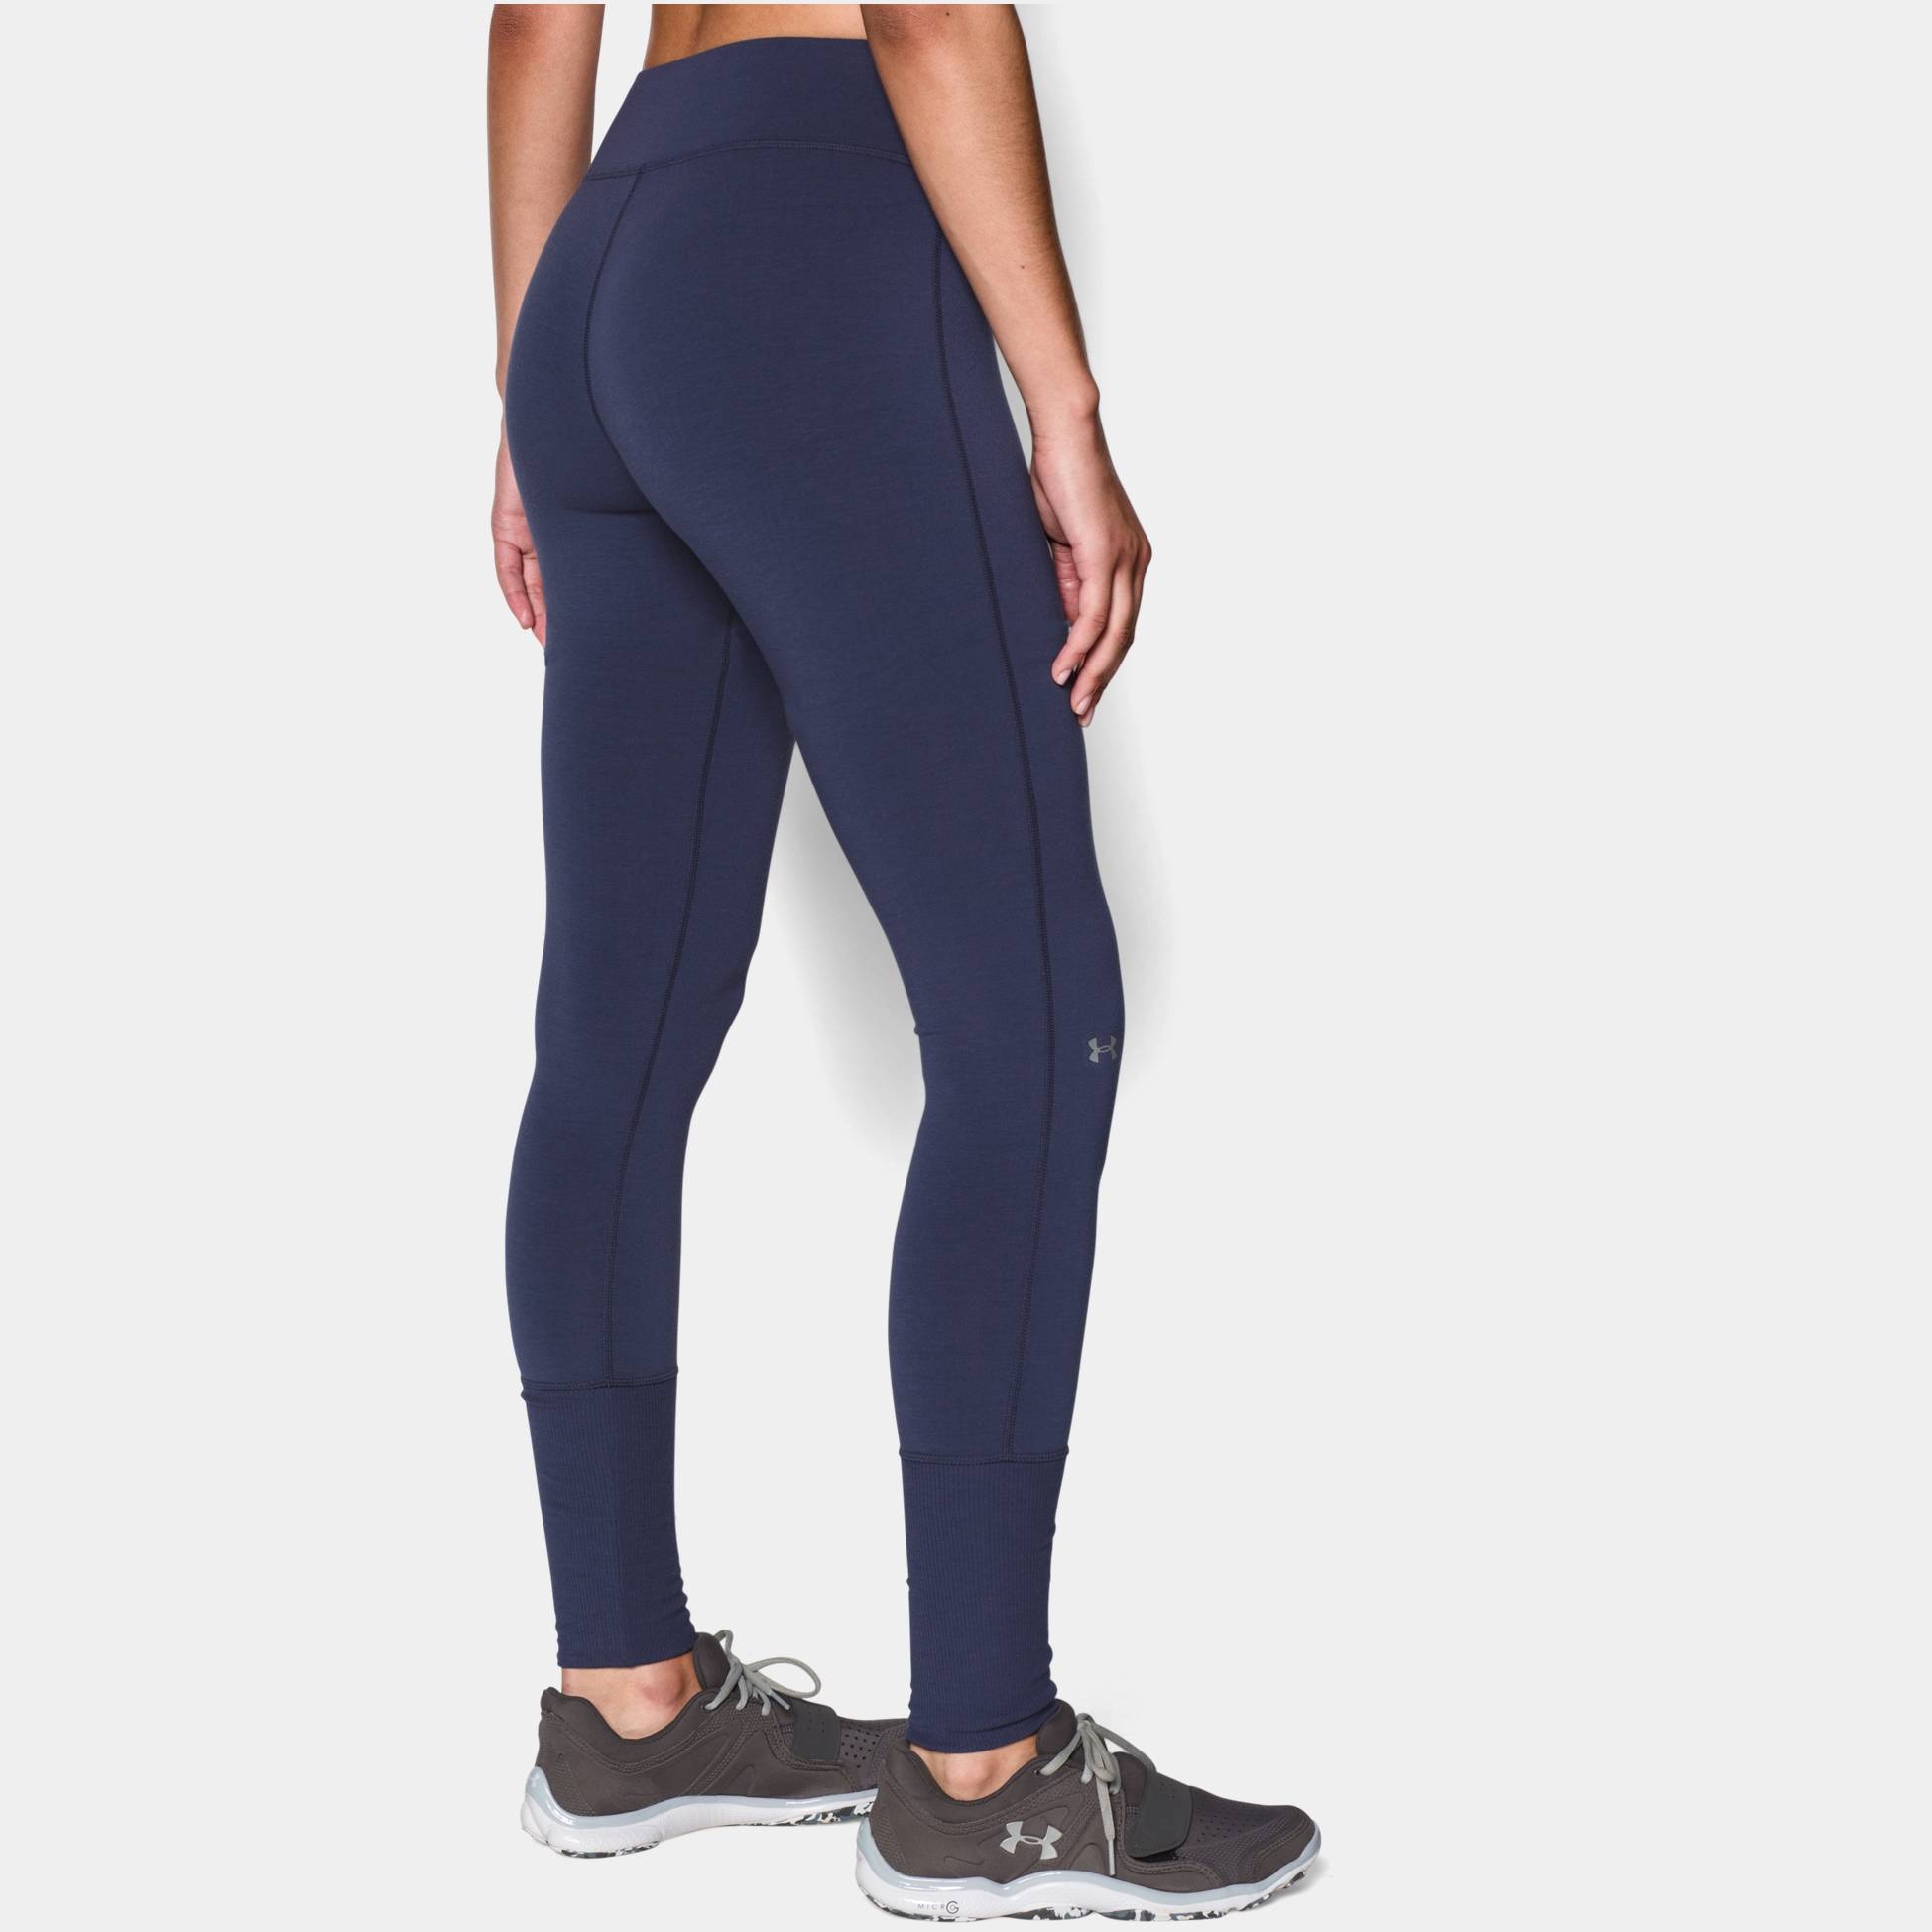 https://img2.sportconcept.com/backend_nou/content/images/fitness-cold-gear-infrared-legging-20151005191827.jpg